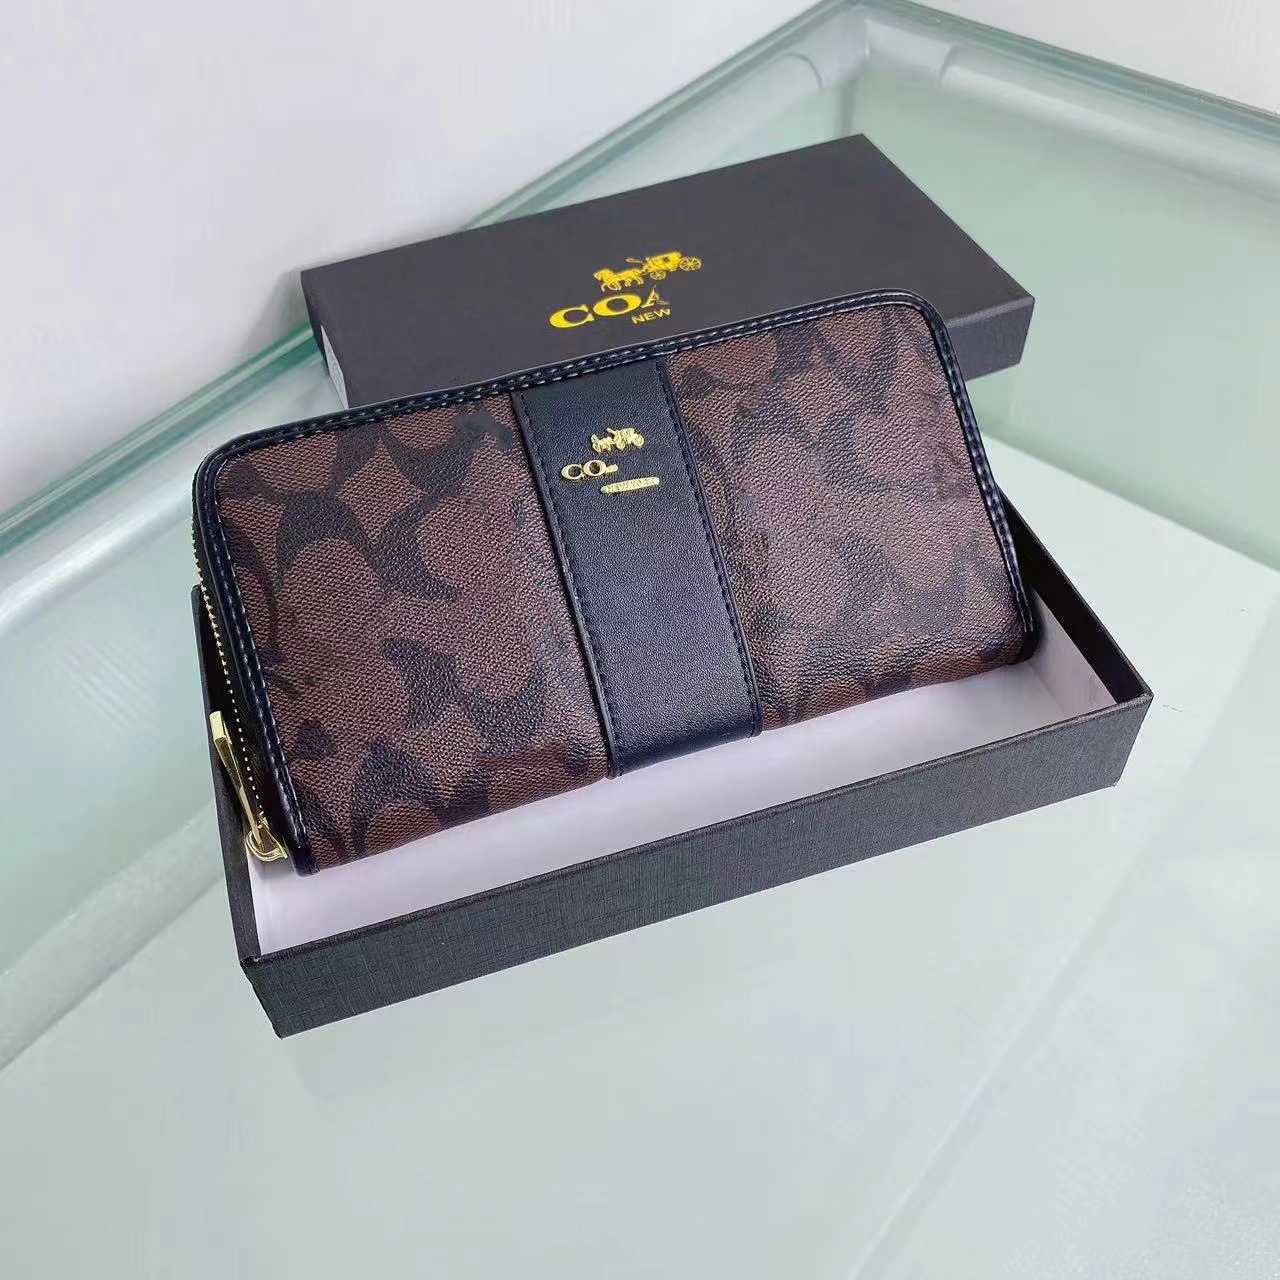 New style long zippered wallet with card holder box and luxury item